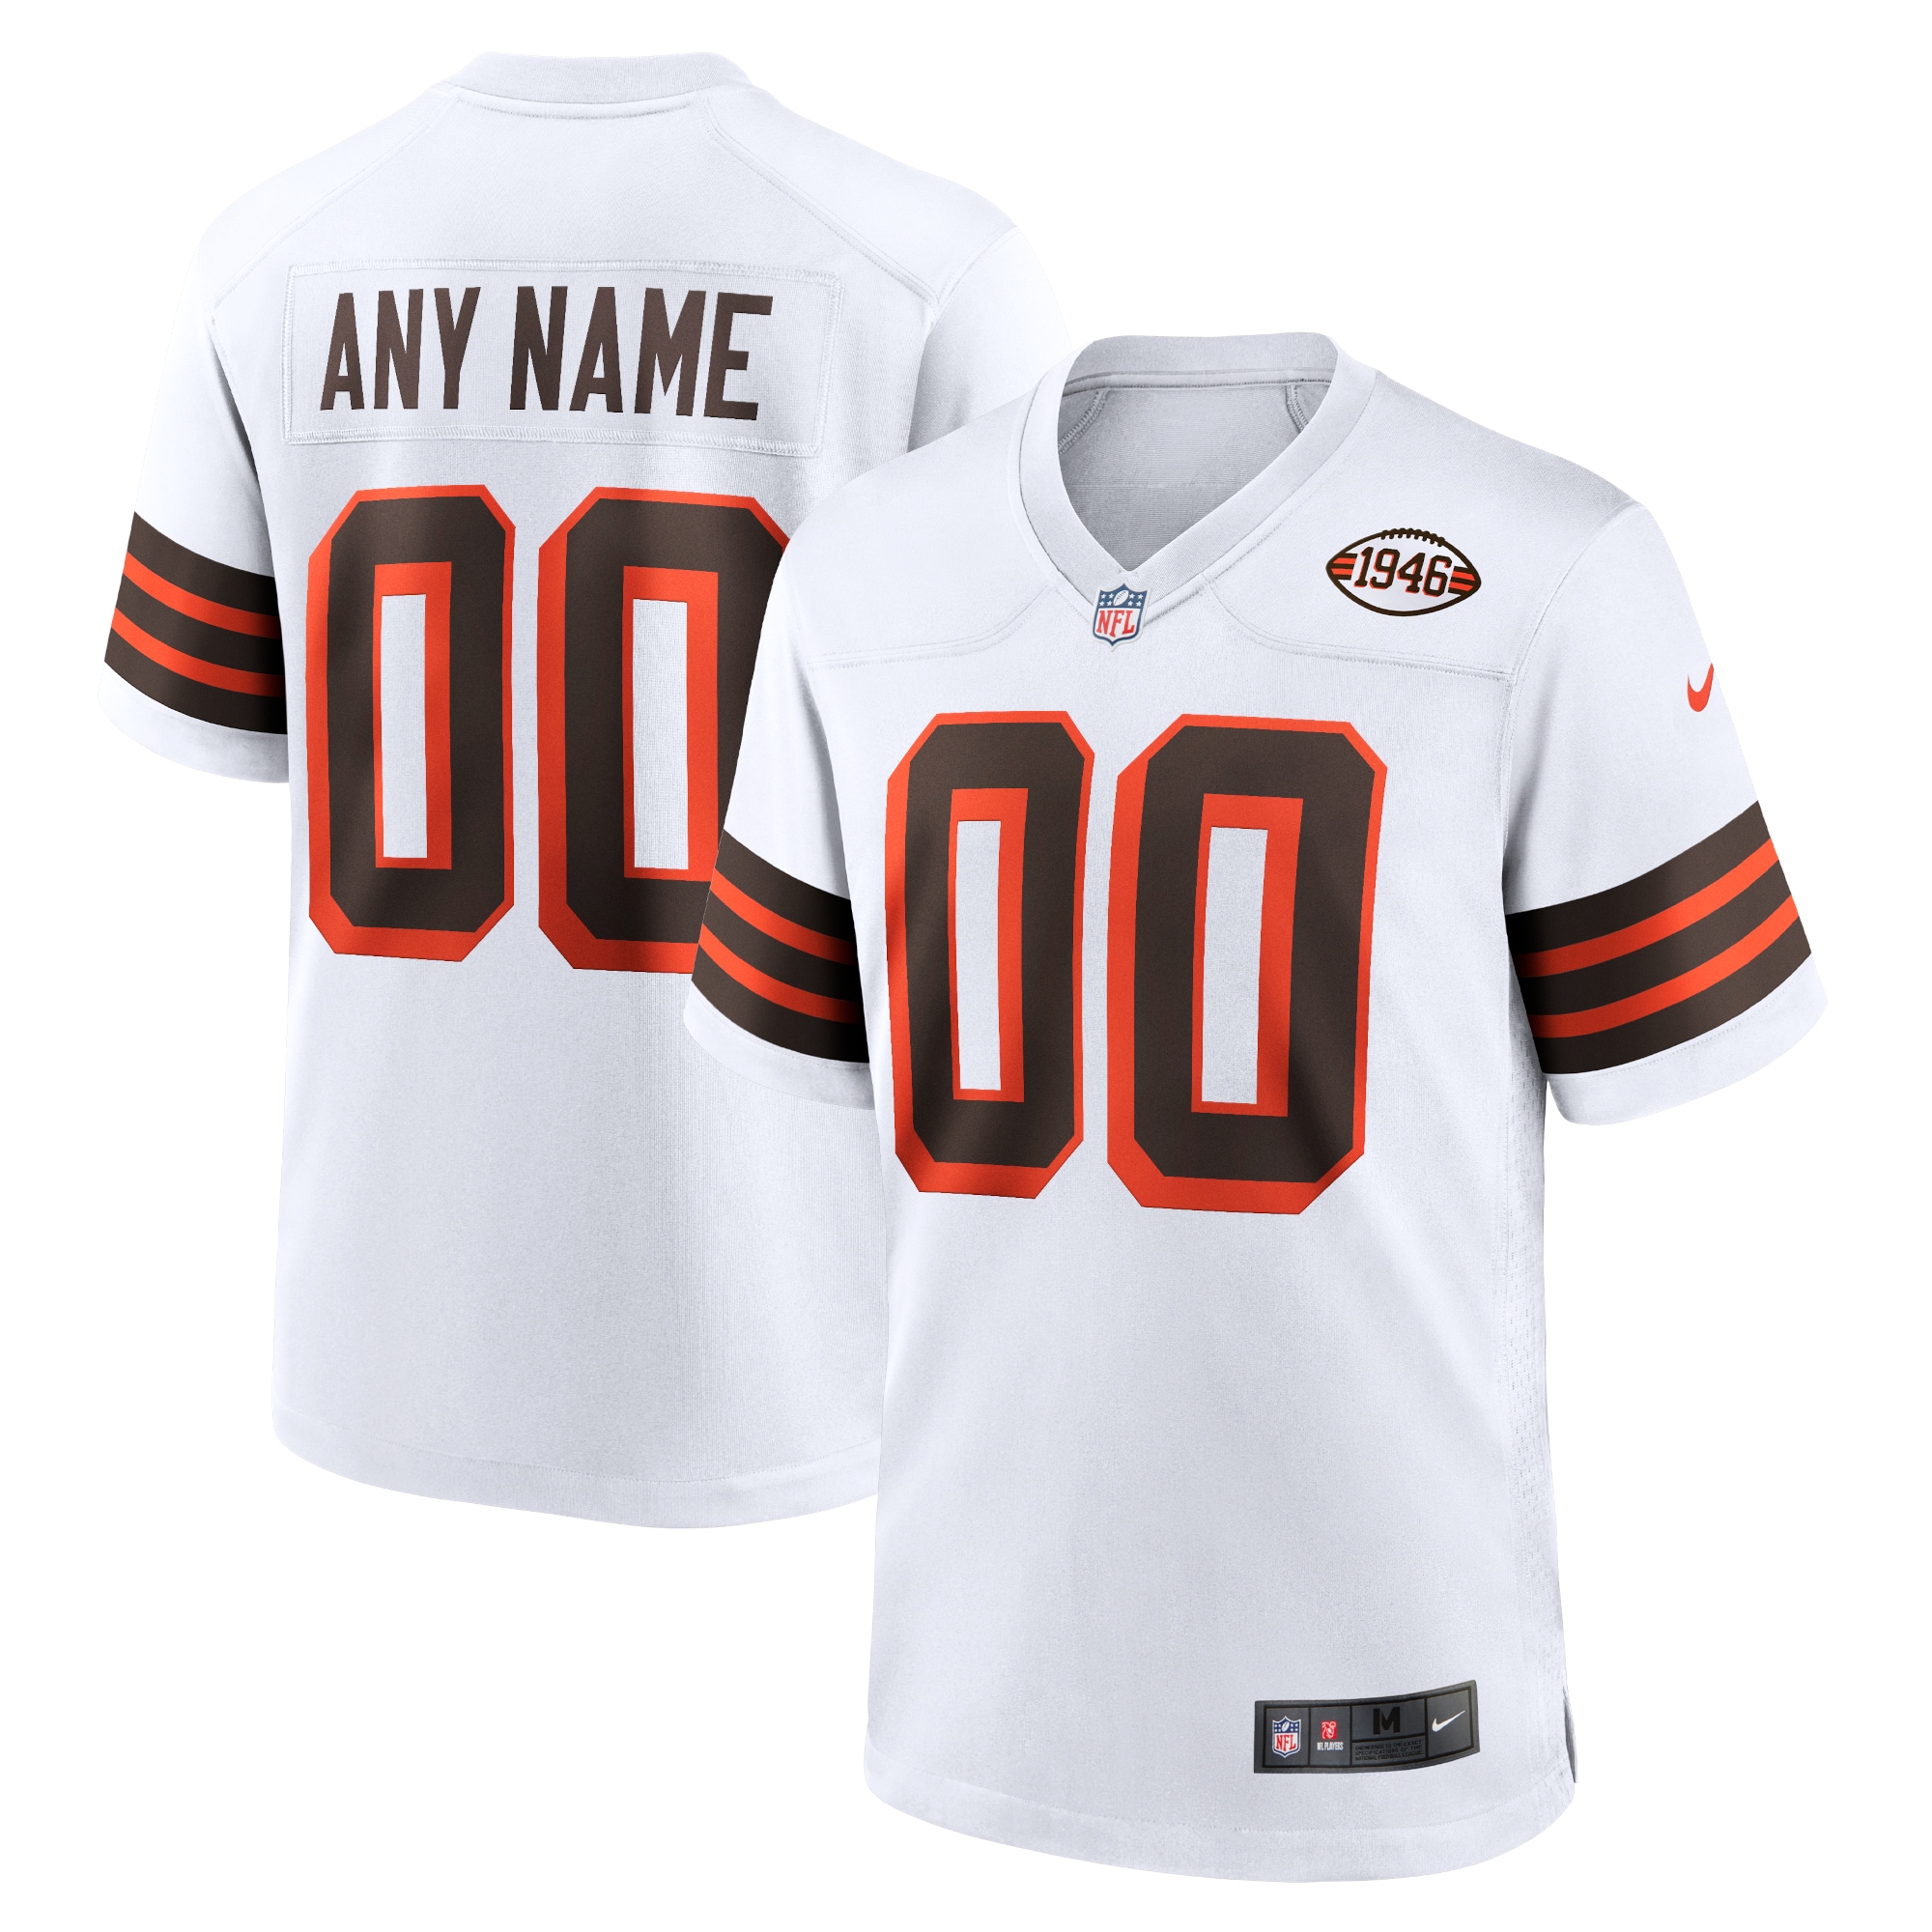 Men's Nike White Cleveland Browns 1946 Collection Alternate Custom Jersey